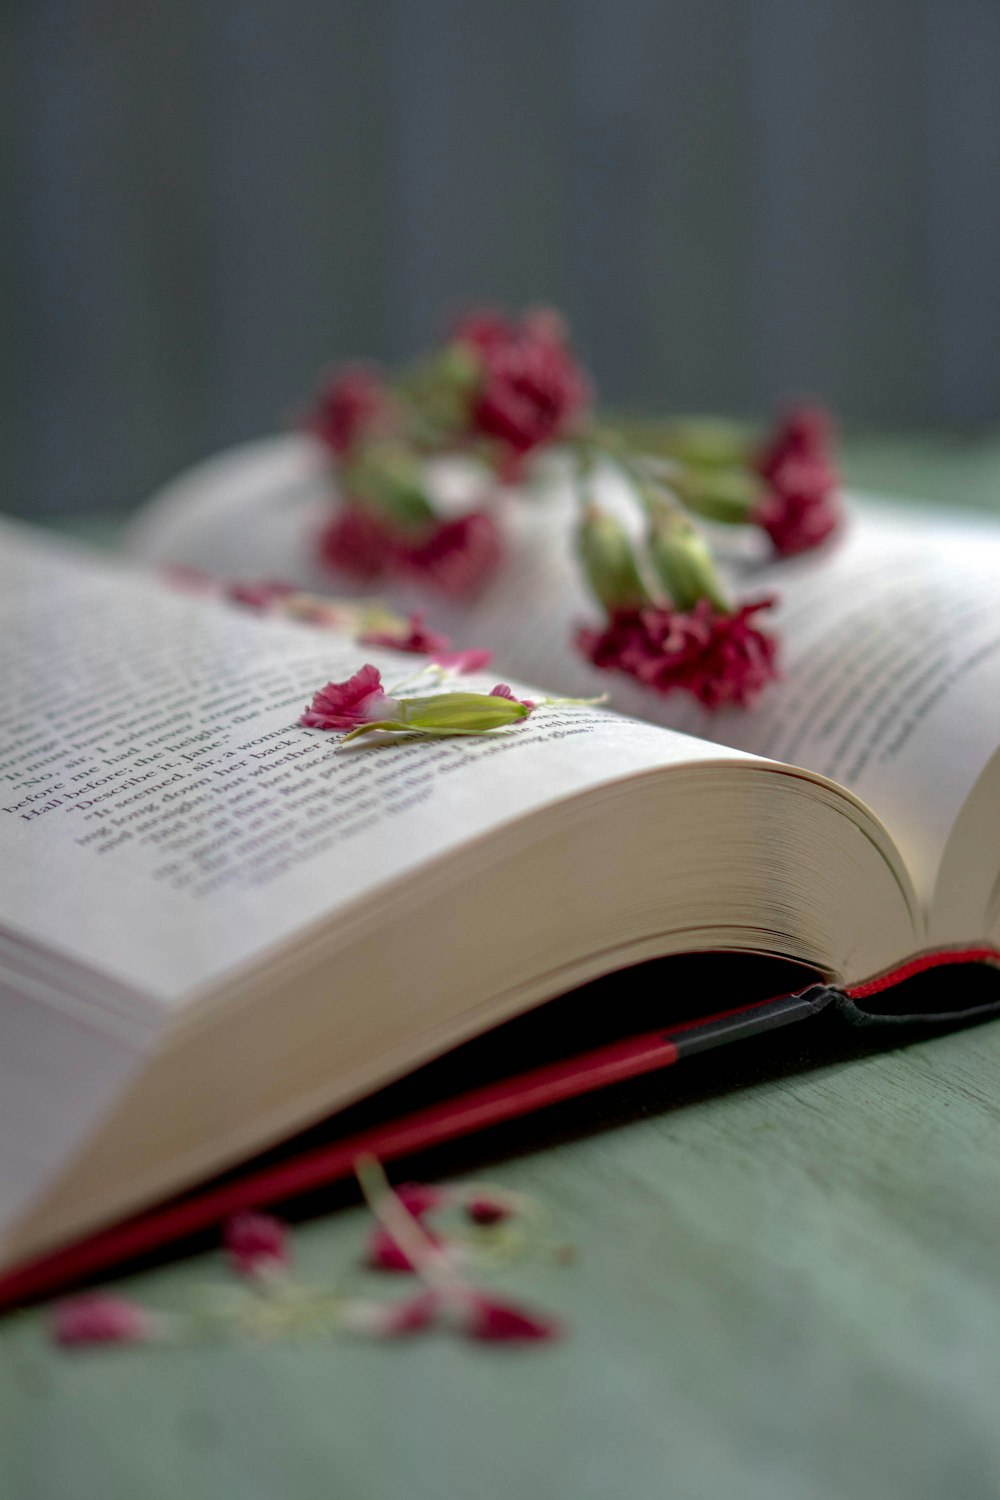 Red and white flowers on book page photo – Free Wisconsin Image on ...